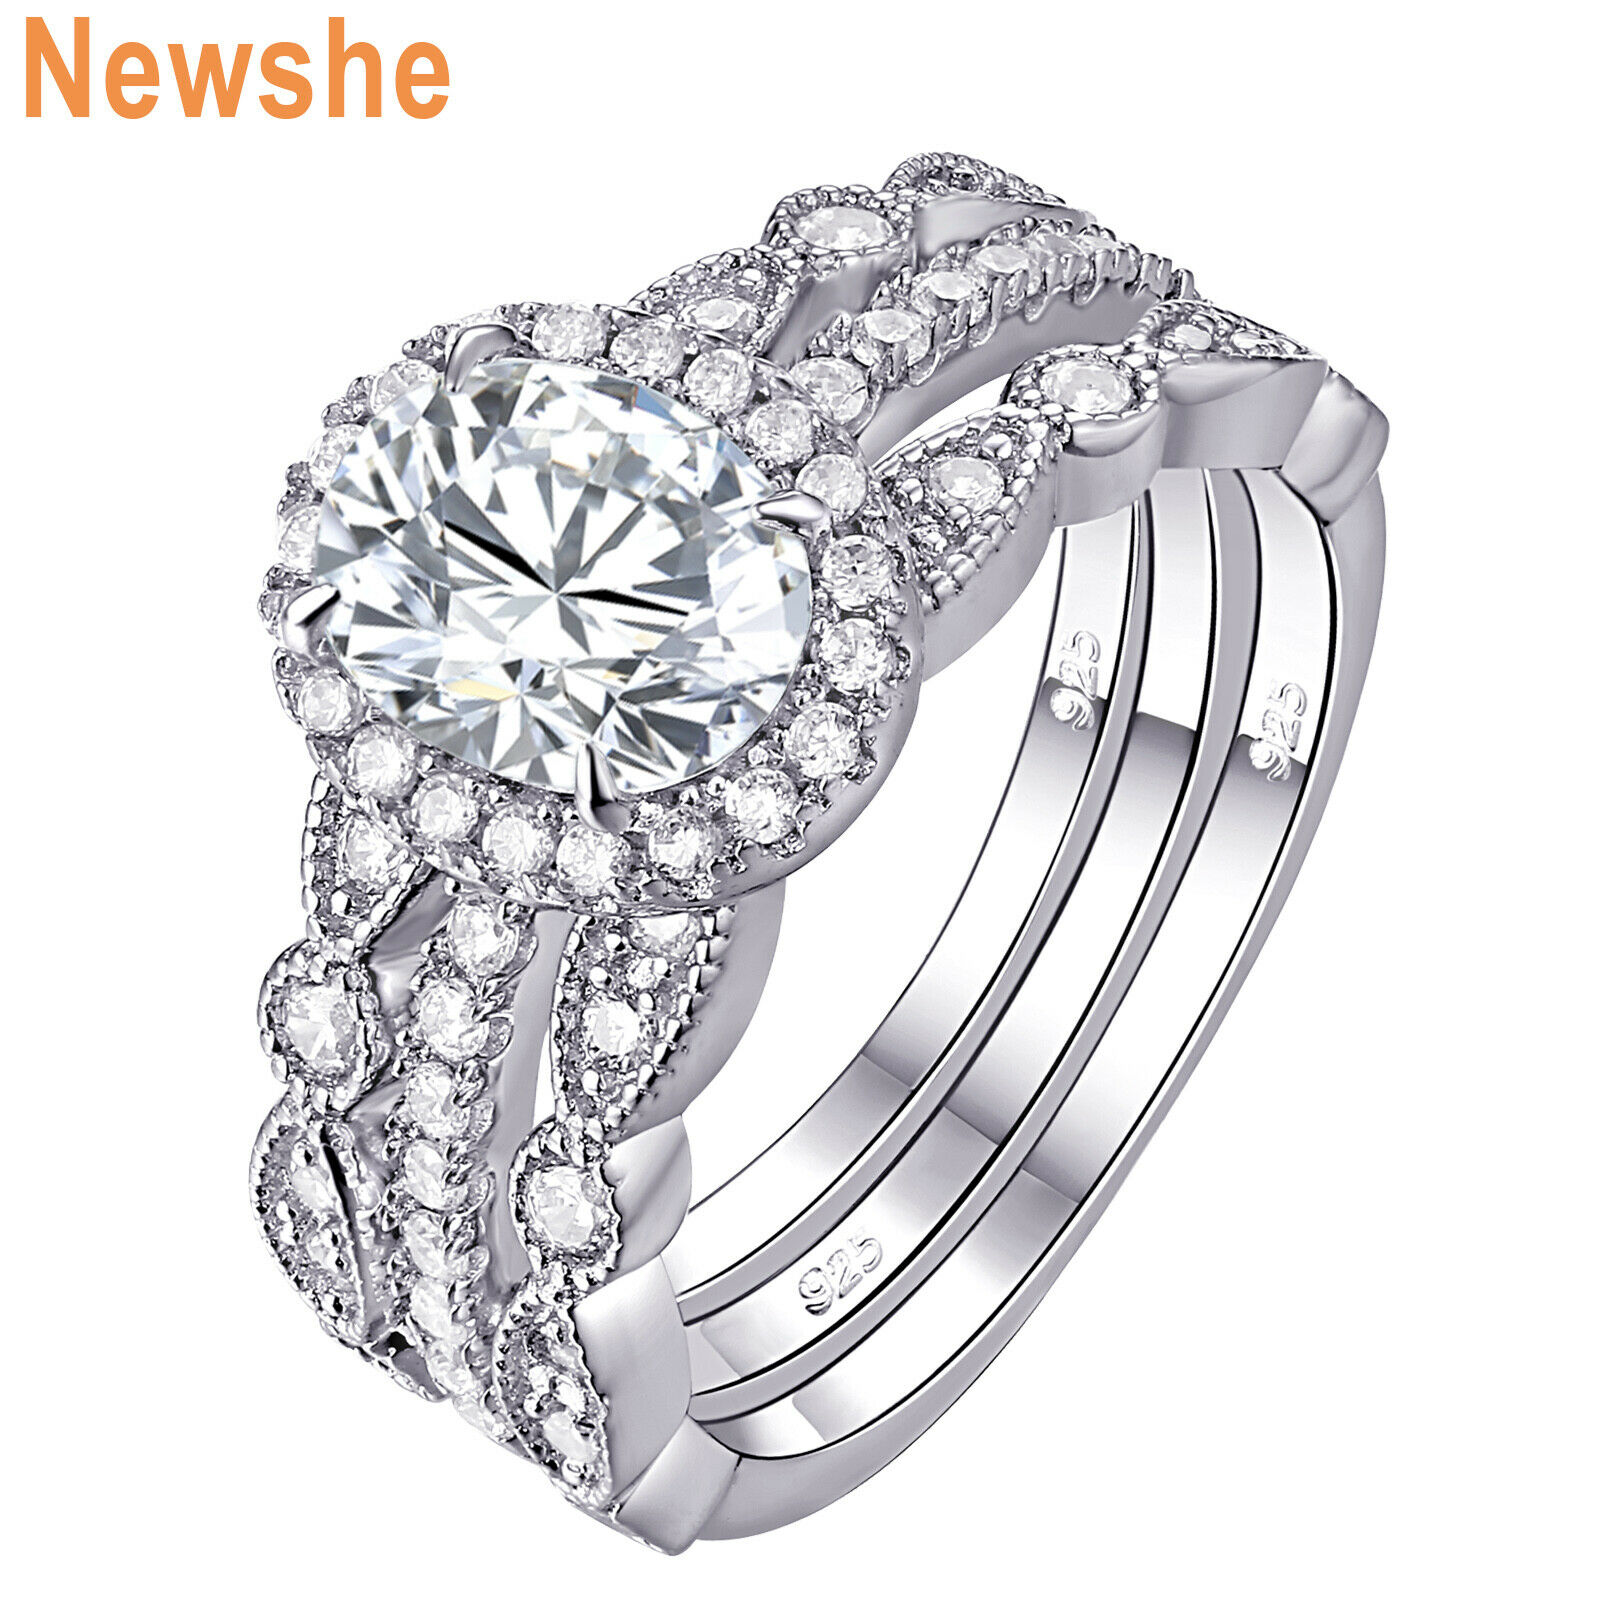 Newshe Engagement Wedding Ring Set For Women Oval Cz 925 Sterling Silver Sz 5-12